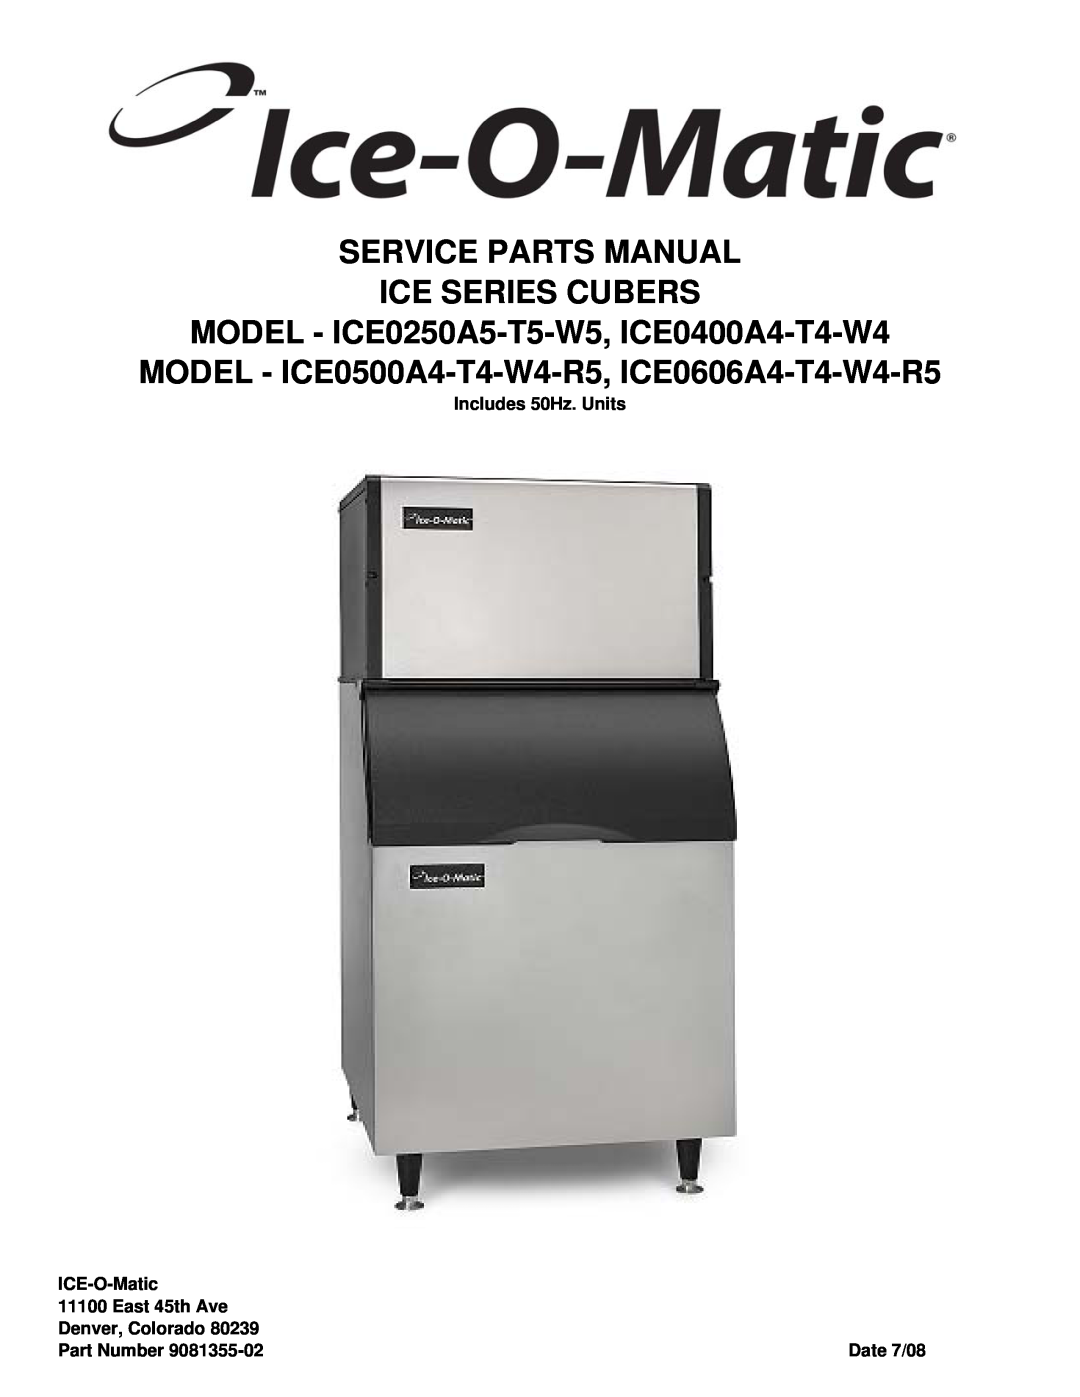 Ice-O-Matic ICE0500A4-T4-W4-R5 manual Service Parts Manual Ice Series Cubers, MODEL - ICE0250A5-T5-W5, ICE0400A4-T4-W4 